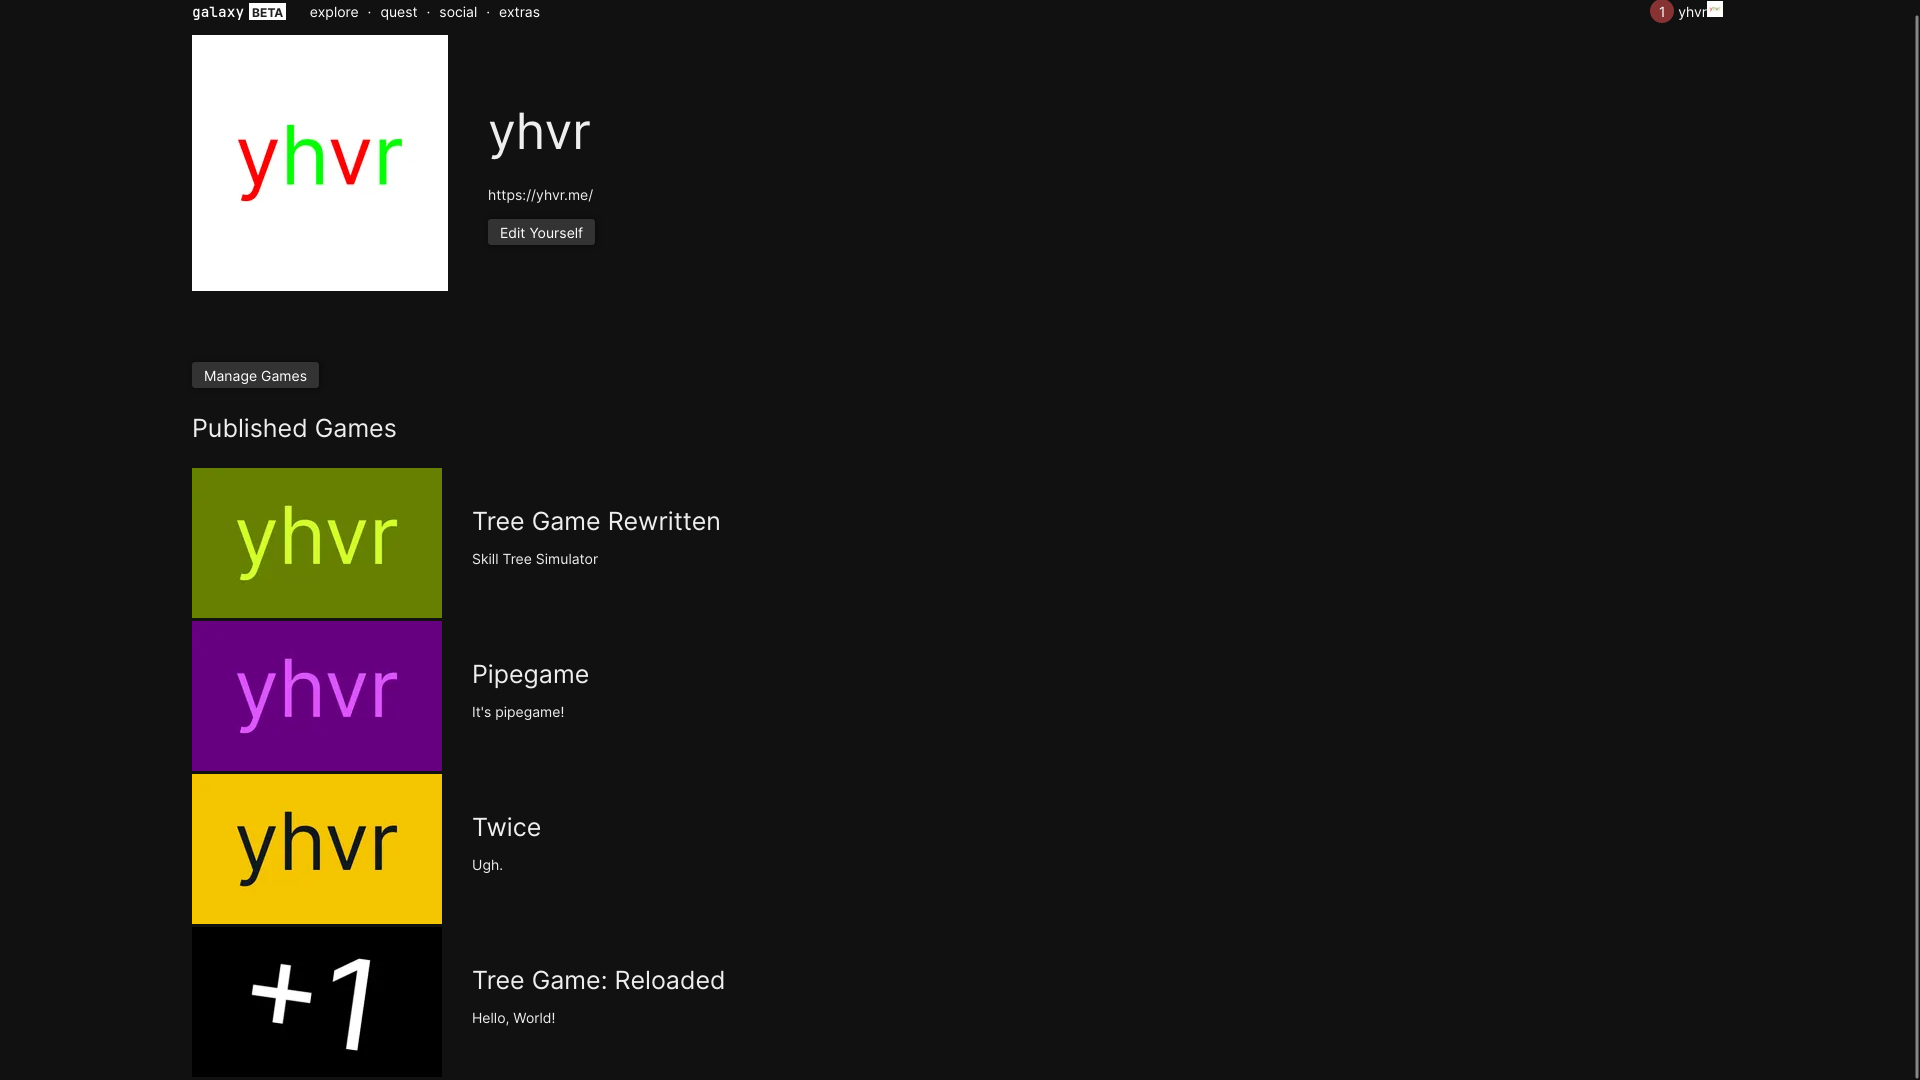 A user page for Yhvr